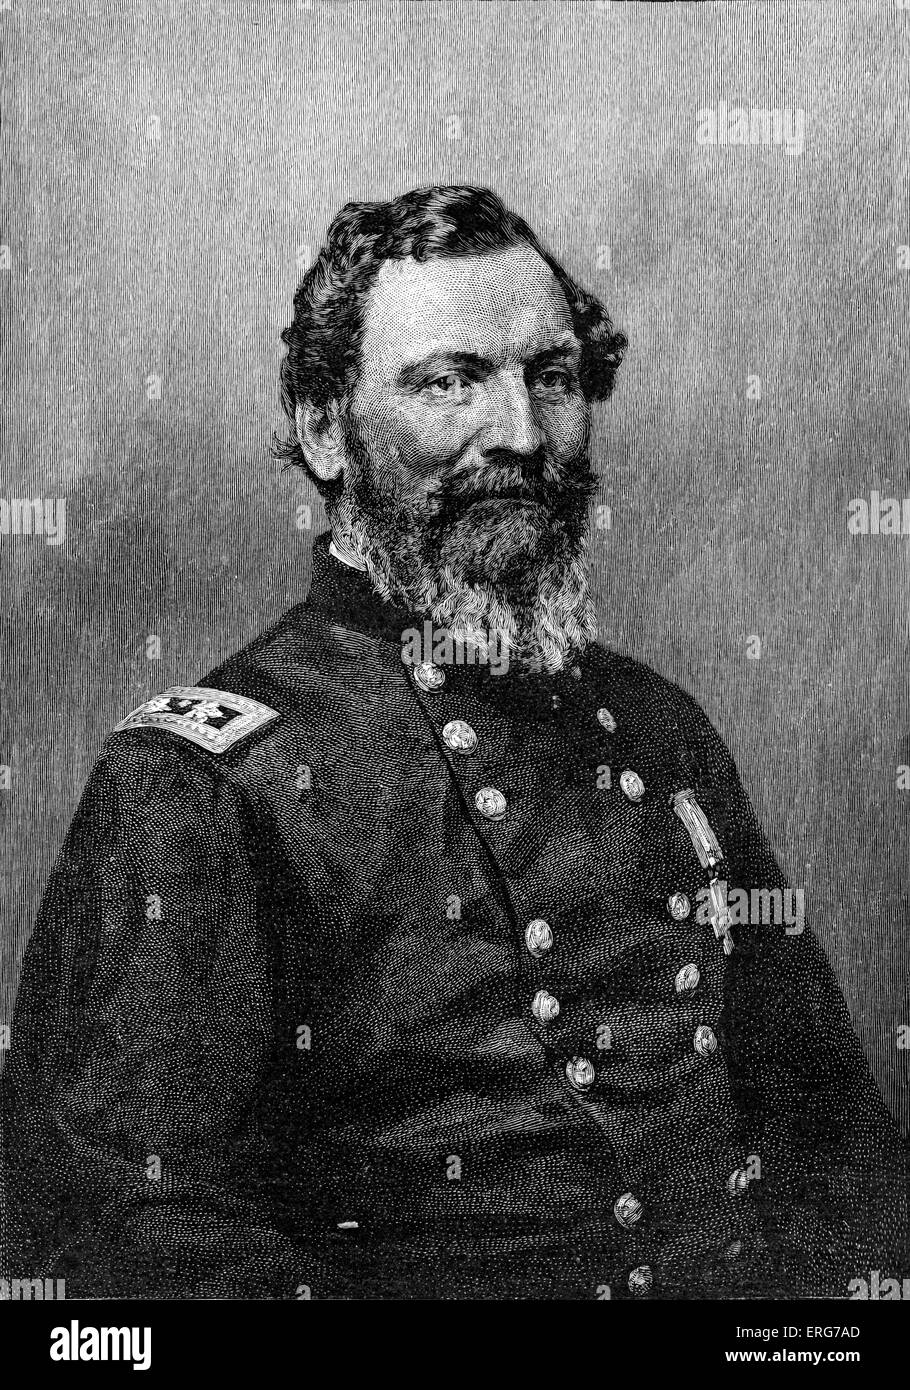 Major General John Sedgwick, after a photograph. Union Army general in the American Civil War, 13 September, 1813 – 9 May, 1864. Stock Photo